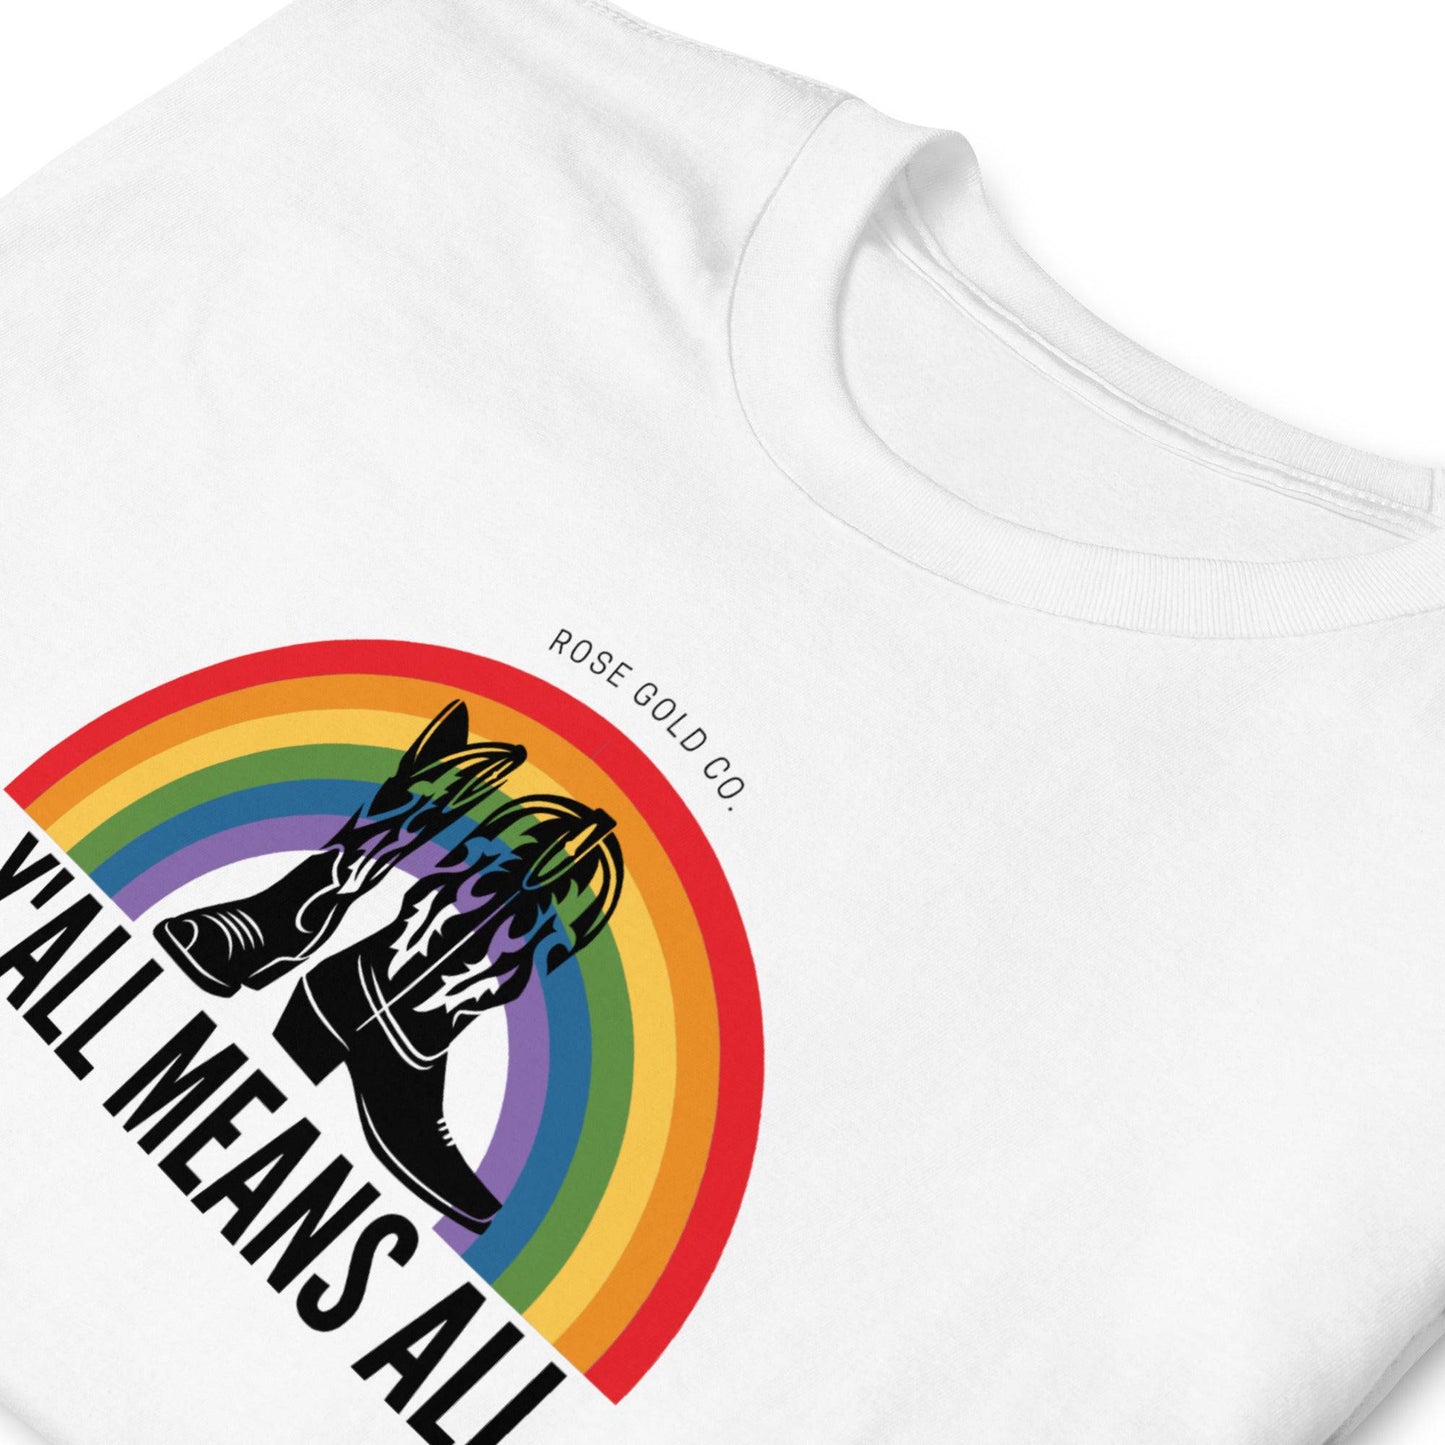 Yall Means All Rainbow Pride Shirt - Rose Gold Co. Shop